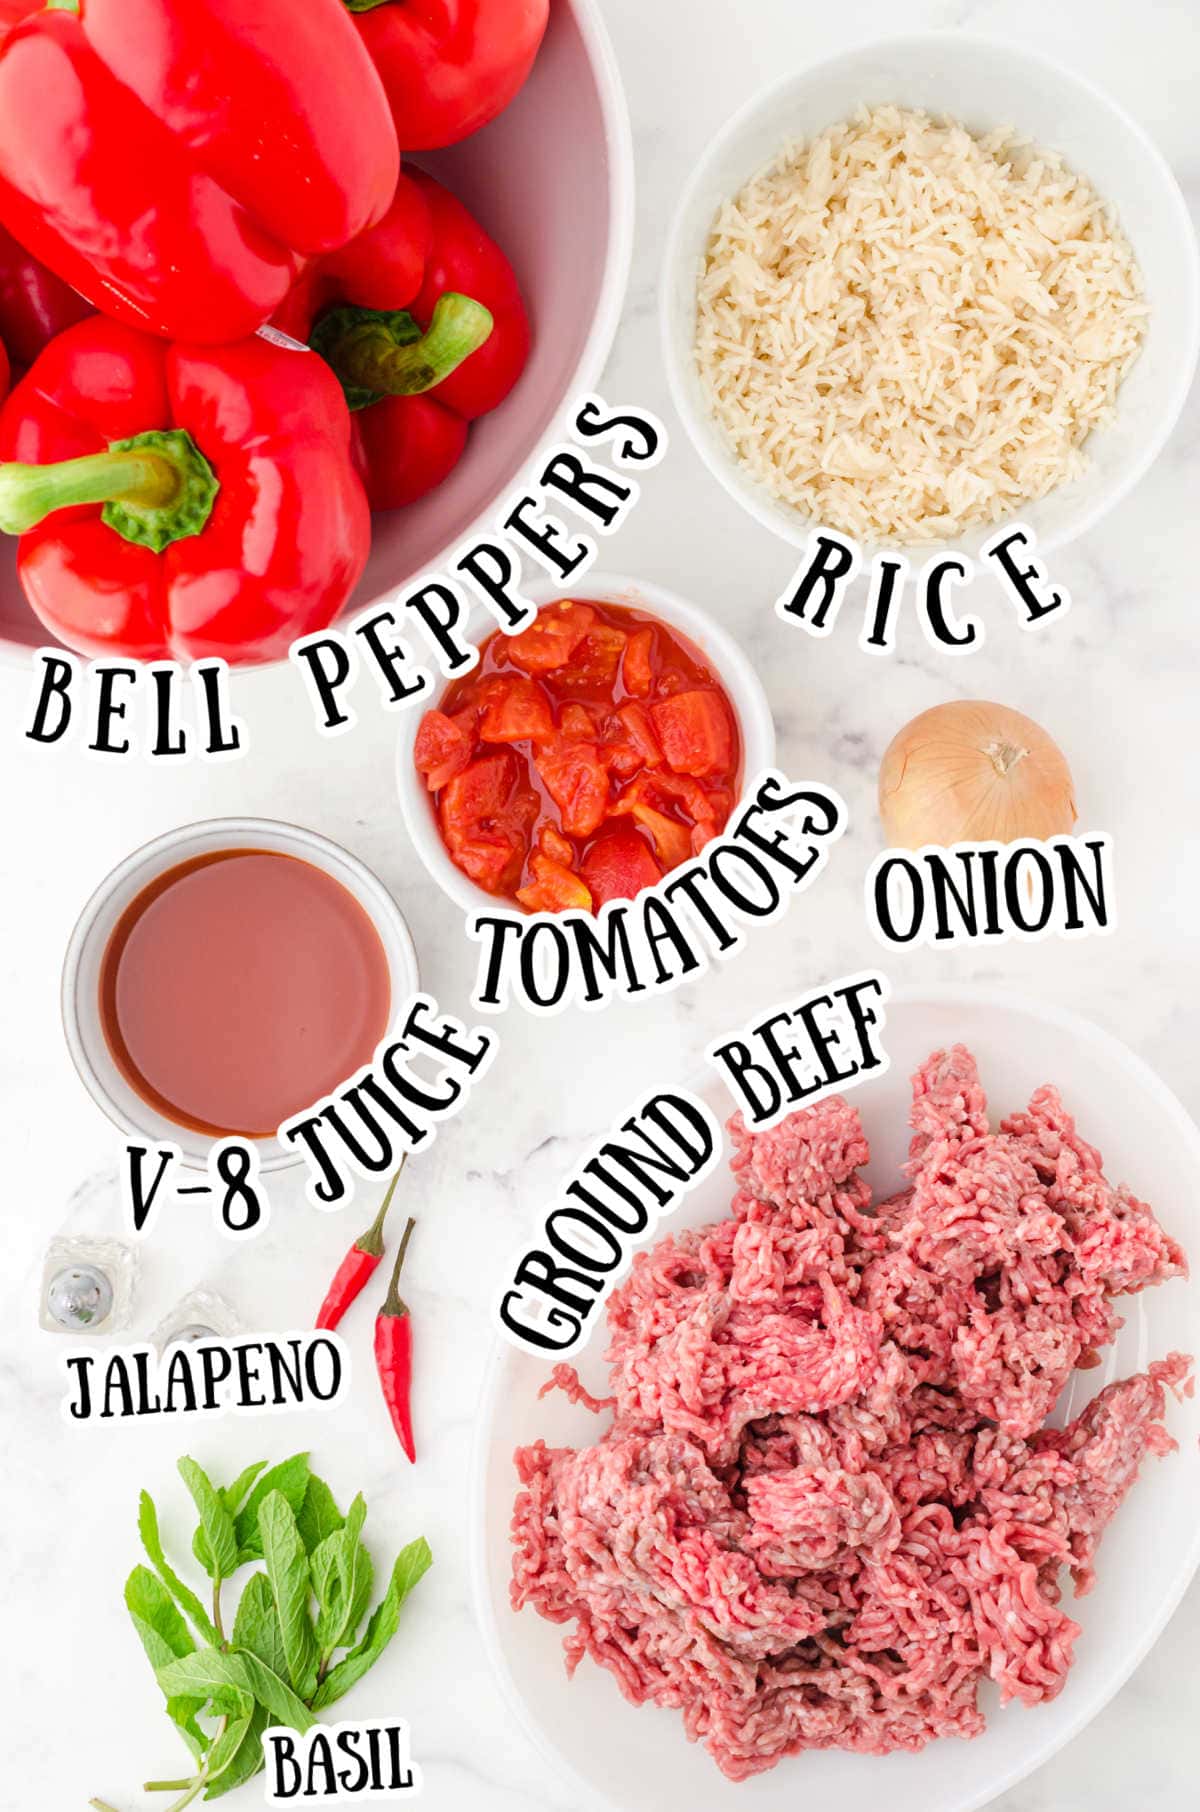 Labeled ingredients for this stuffed pepper recipe.